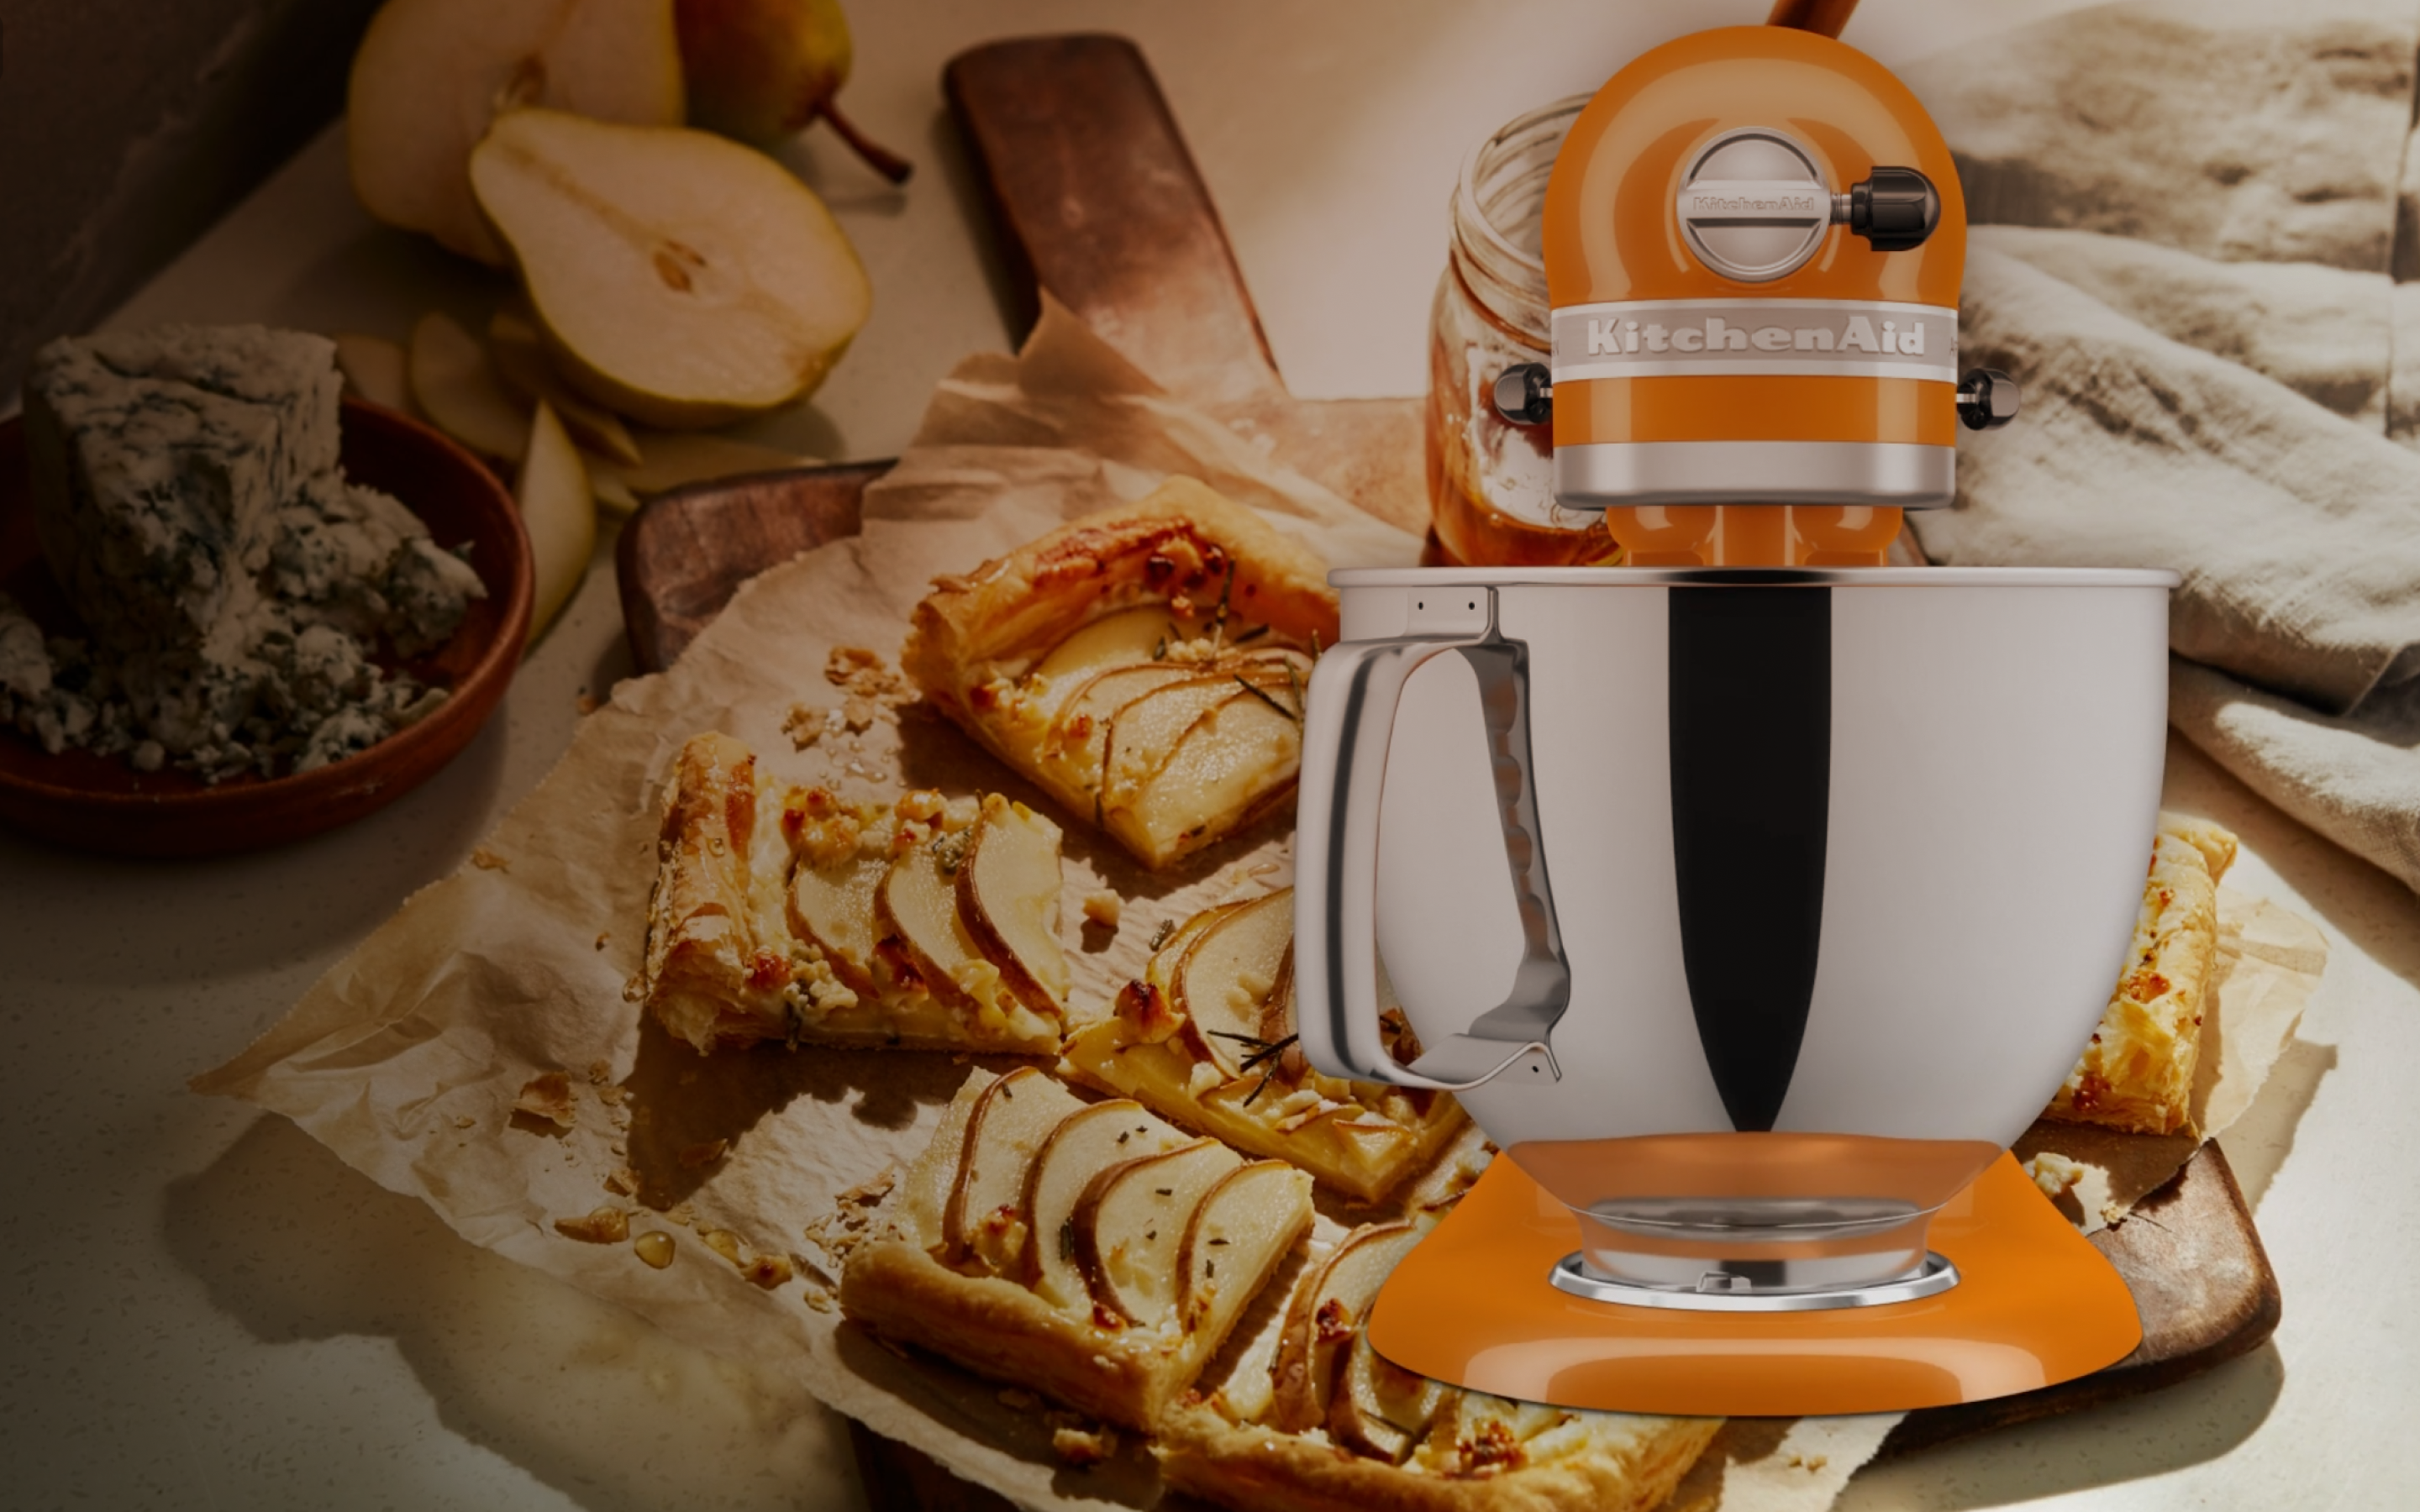 A KitchenAid stand mixer over baked goods and halved pears.